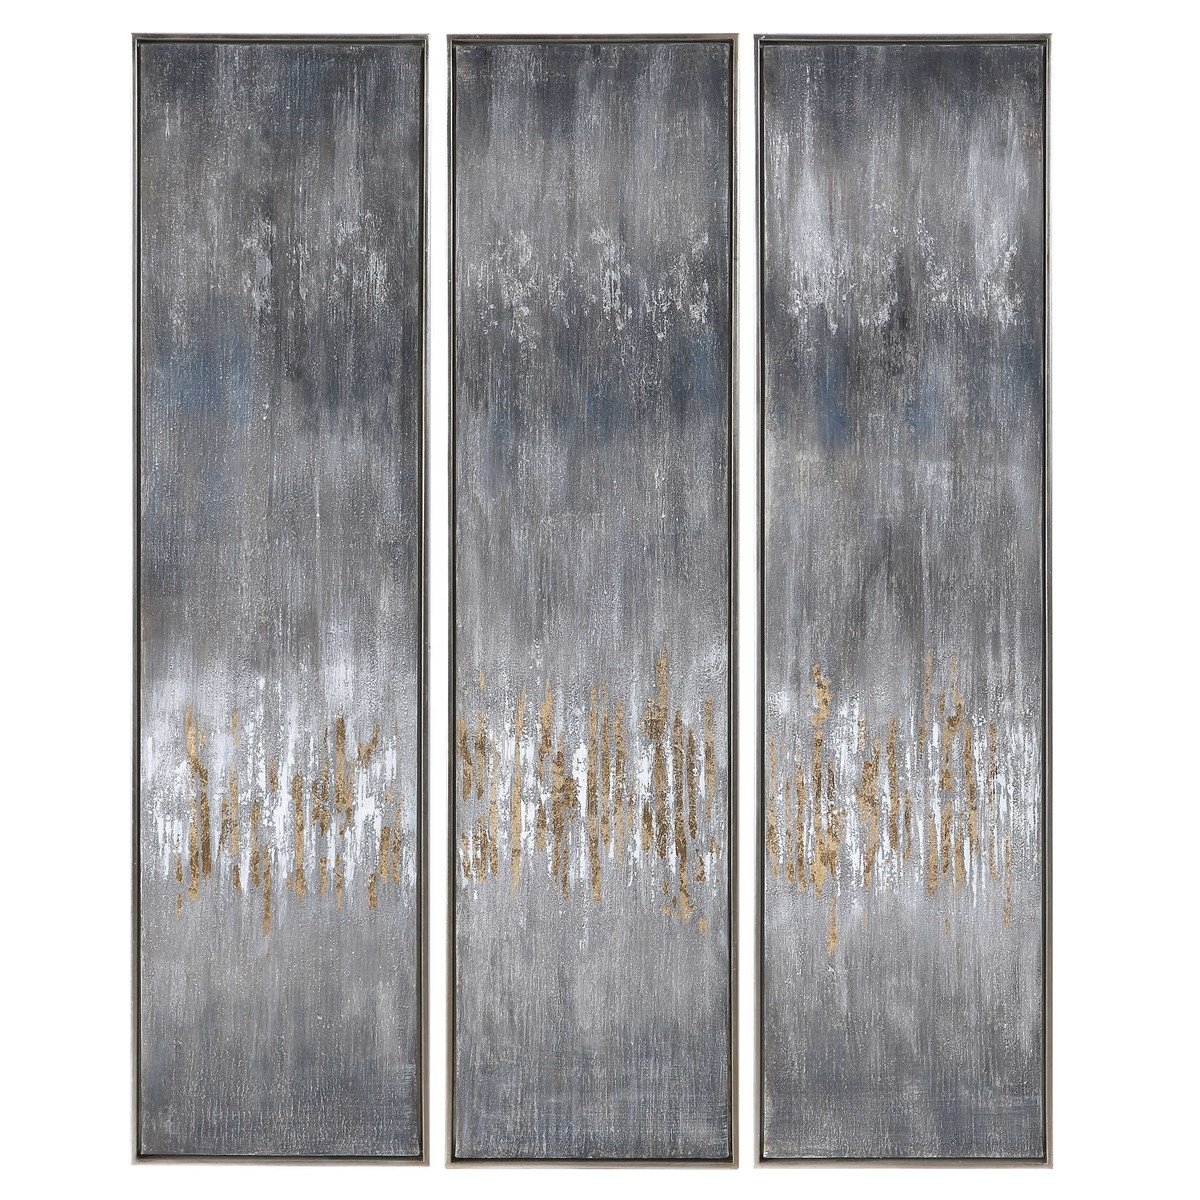 GRAY SHOWERS HAND PAINTED CANVASES, S/3 - Image 0